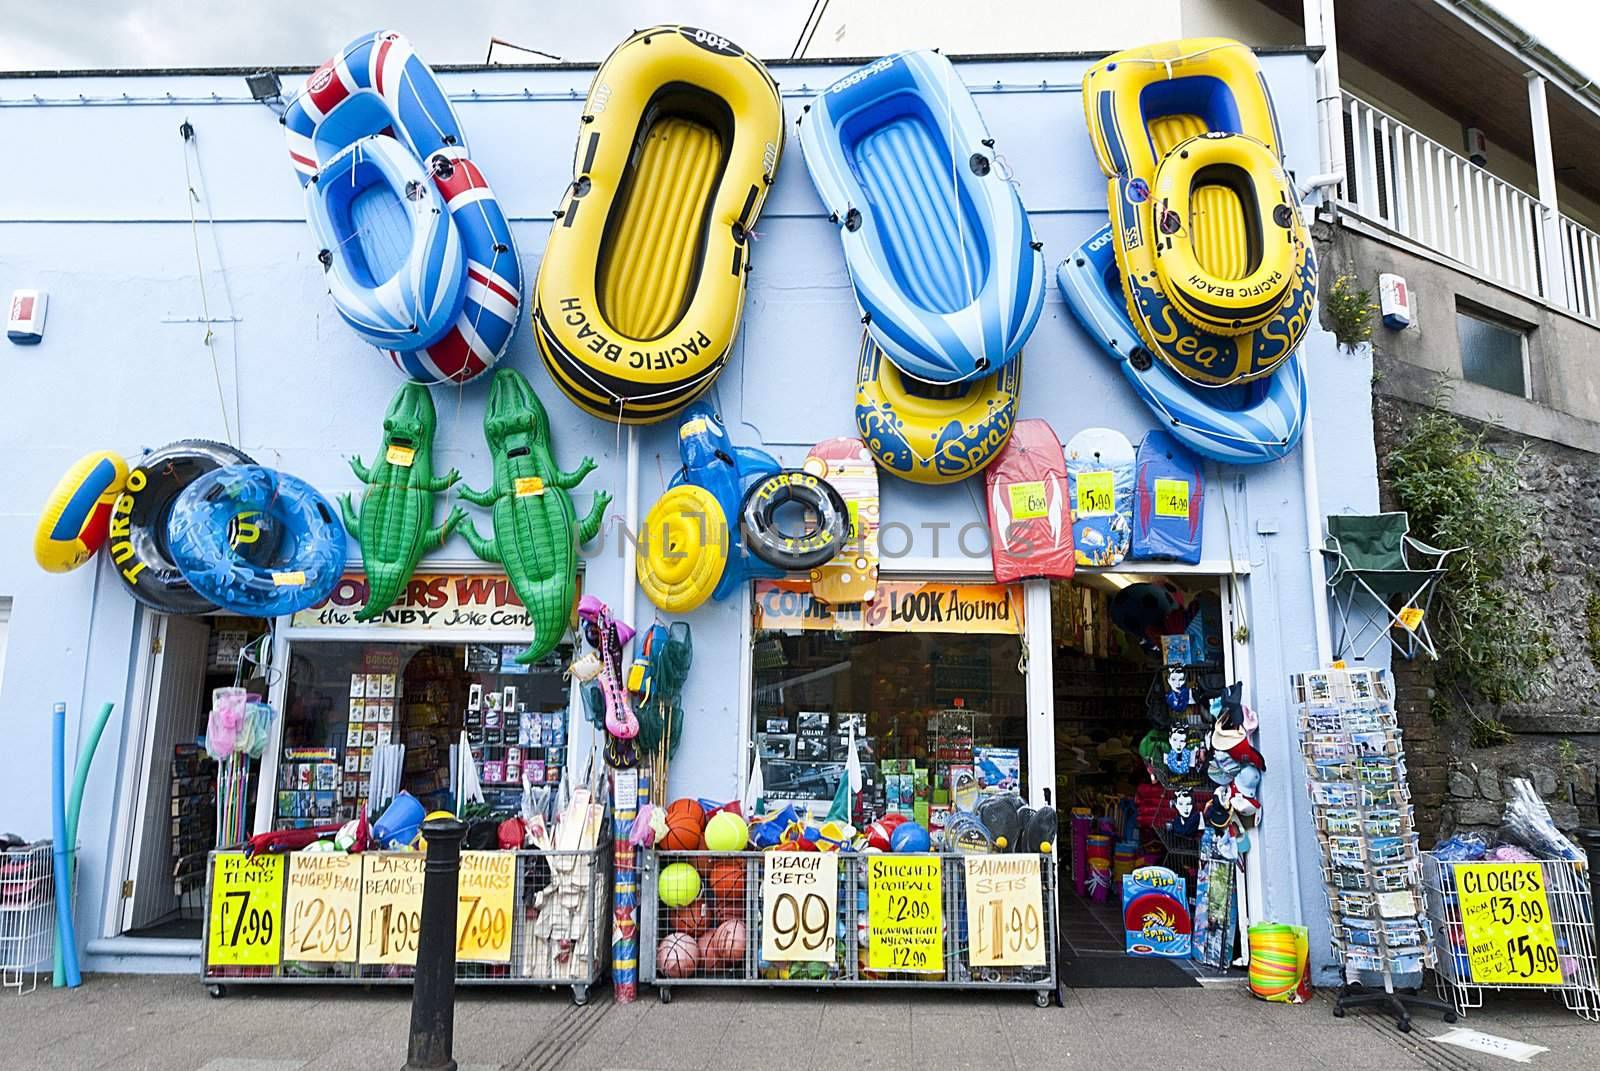 inflatable sea toy boats hanging on wall at sea side shop, tenby wales.